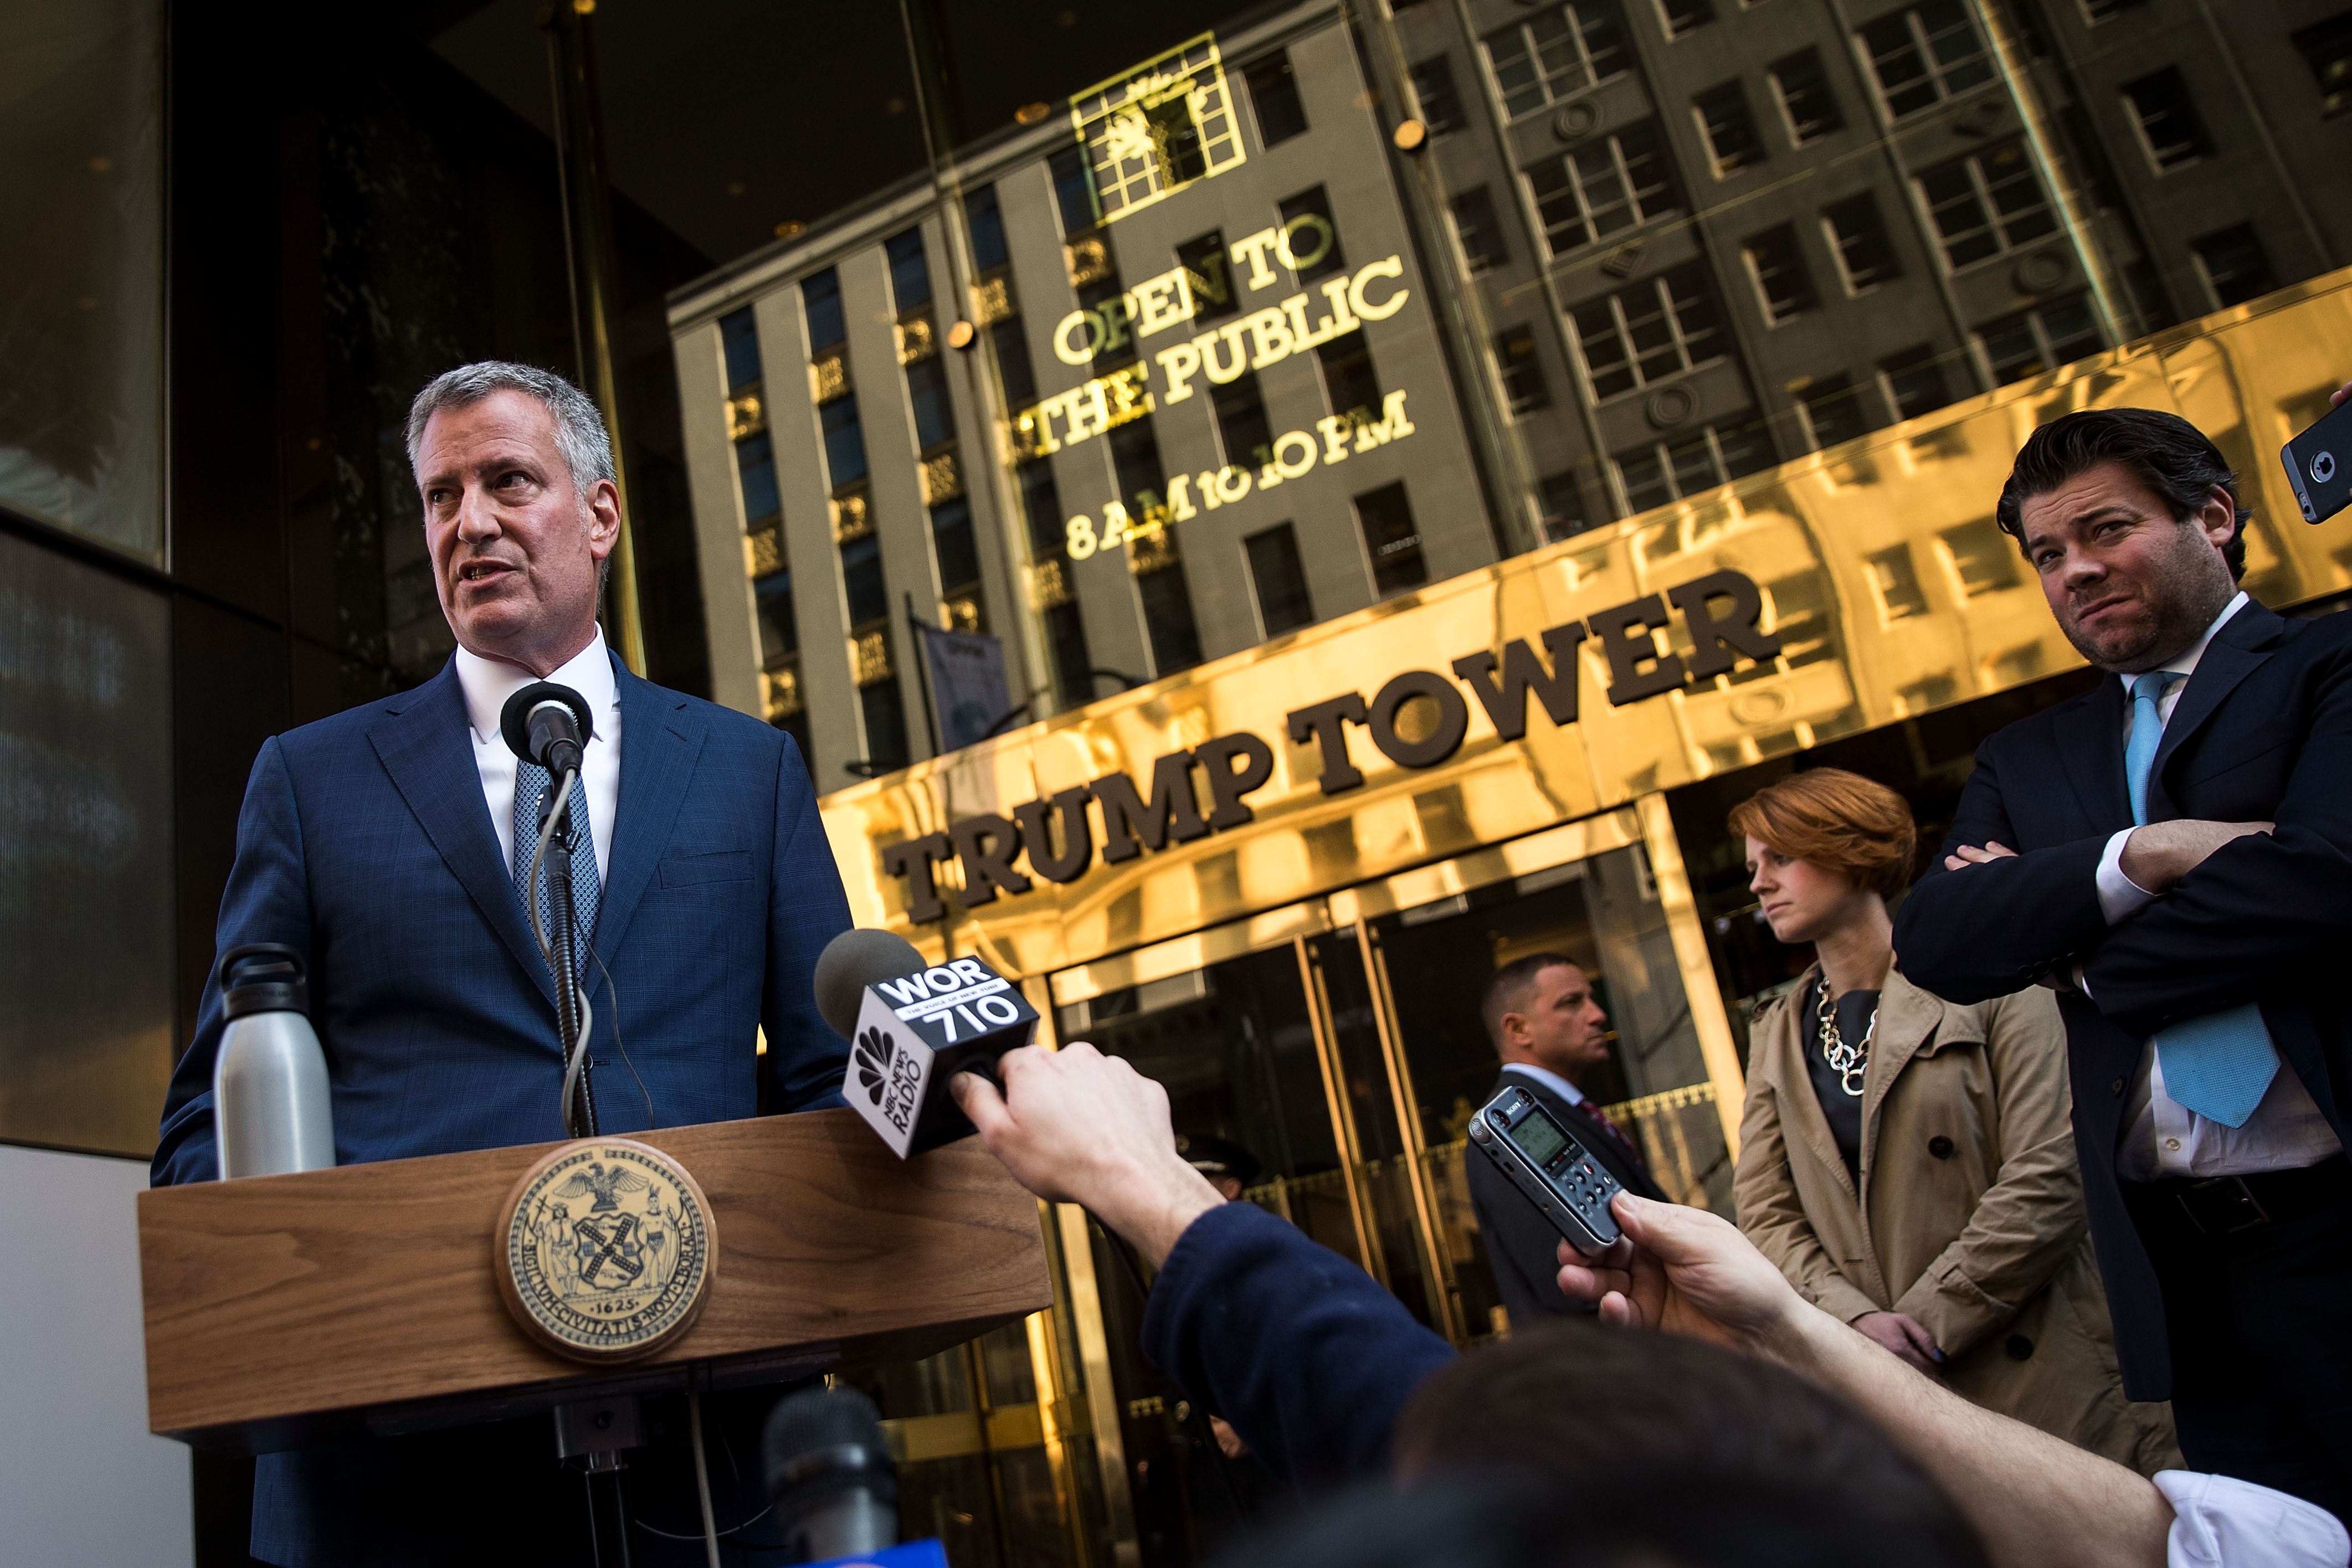 NEW YORK, NY - NOVEMBER 16: New York City mayor Bill de Blasio speaks to the press in front of Trump Tower after his meeting with president-elect Donald Trump, November 16, 2016 in New York City. Trump is in the process of choosing his presidential cabinet as he transitions from a candidate to the president-elect.   Drew Angerer/Getty Images/AFP